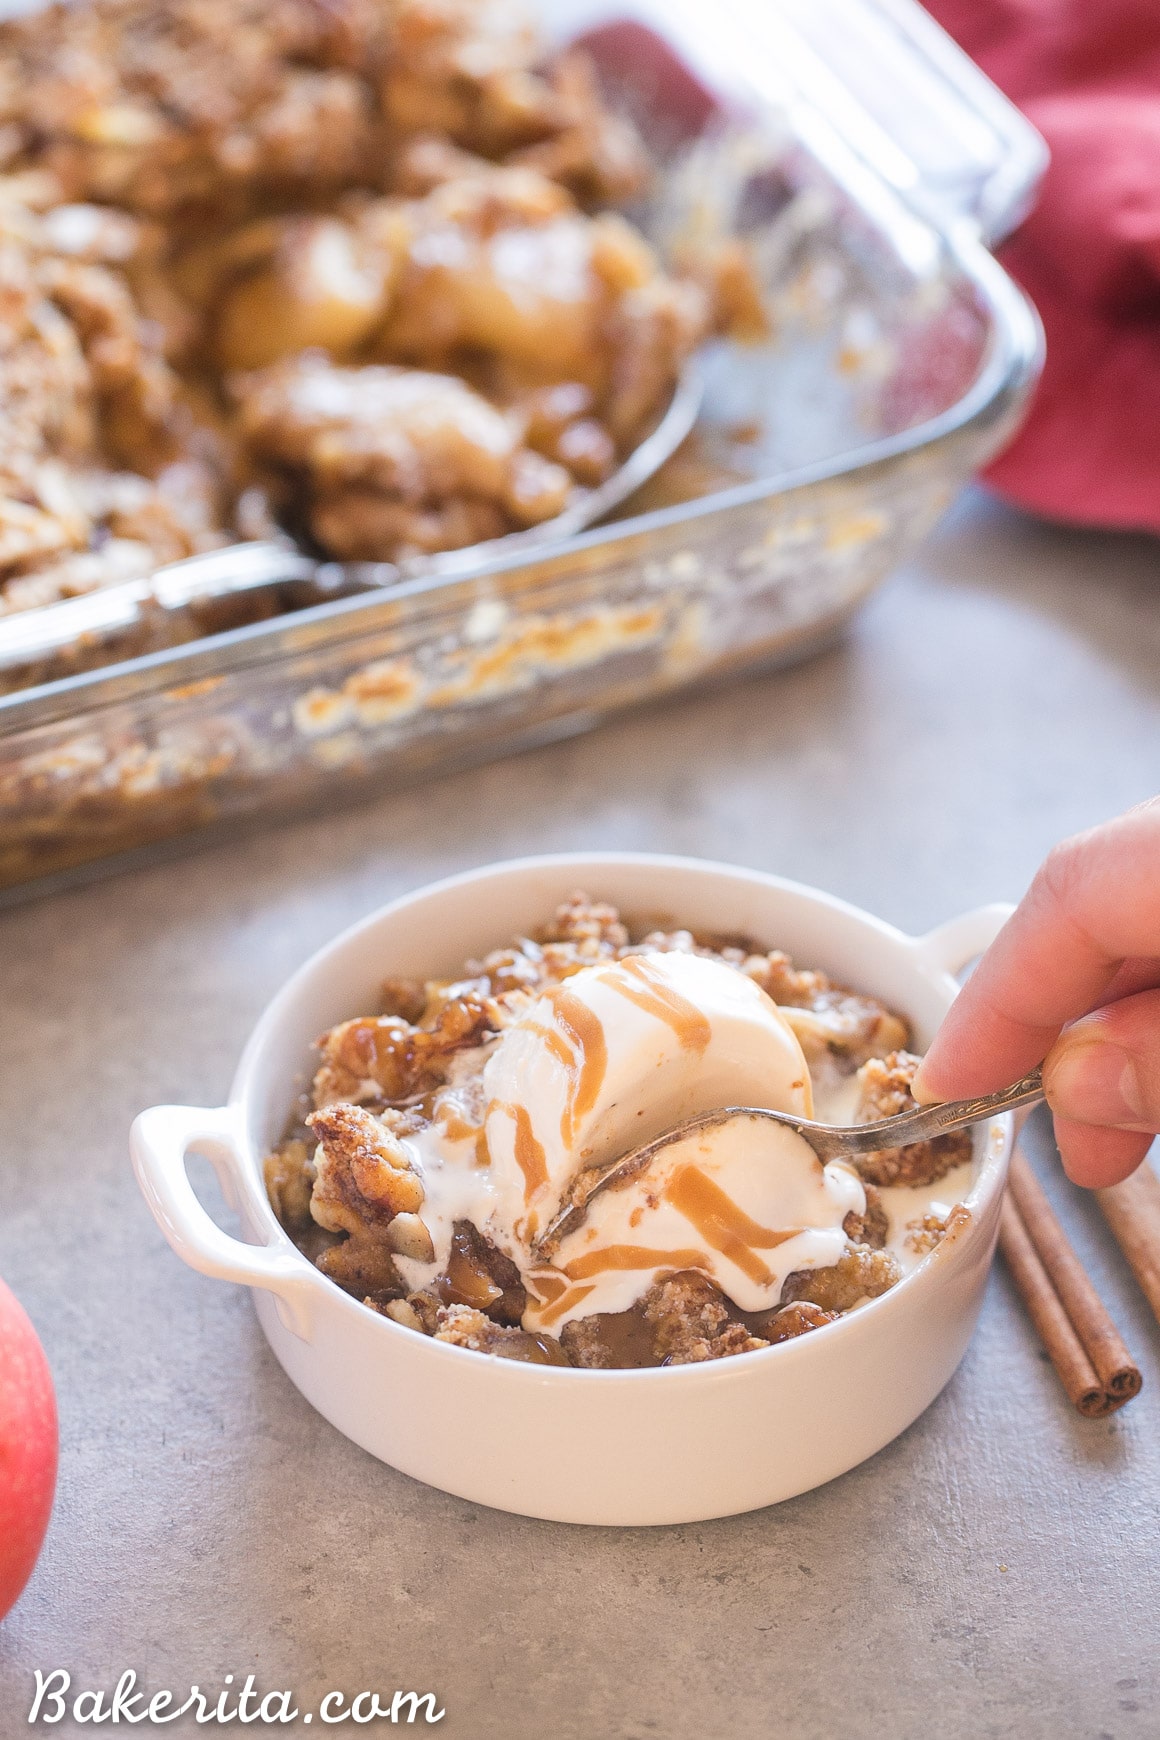 This Pear Apple Crisp combines two of the best fall fruits into one delicious crisp, flavored with vanilla, cinnamon and ginger and topped with a grain-free crumble topping. This crisp is gluten-free, Paleo, and vegan.